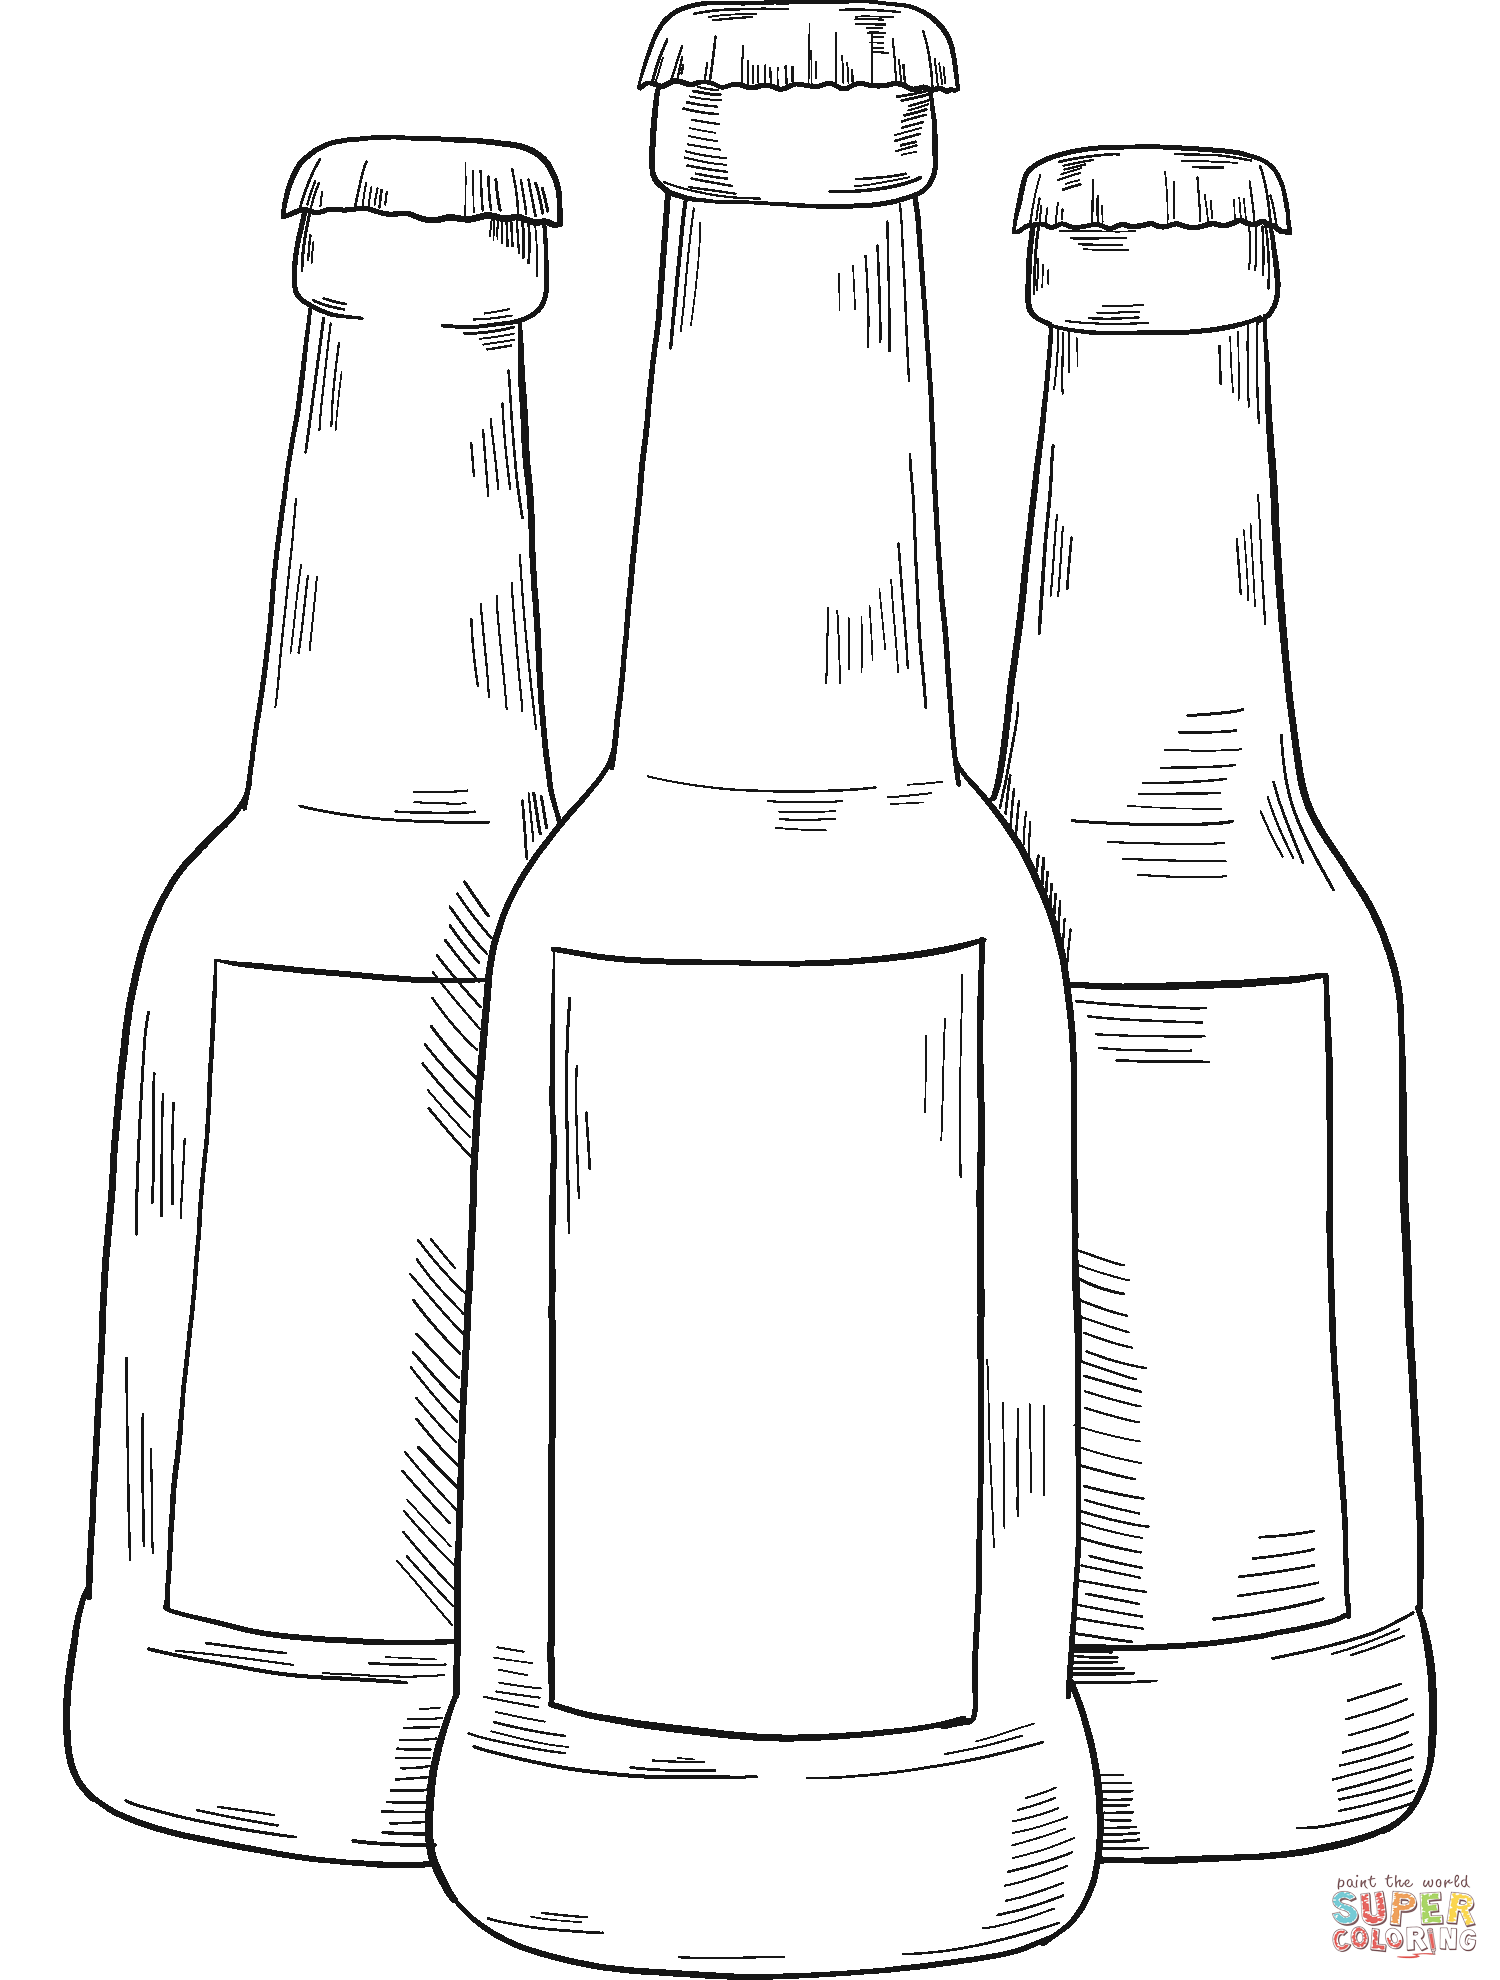 Beer bottles coloring page free printable coloring pages